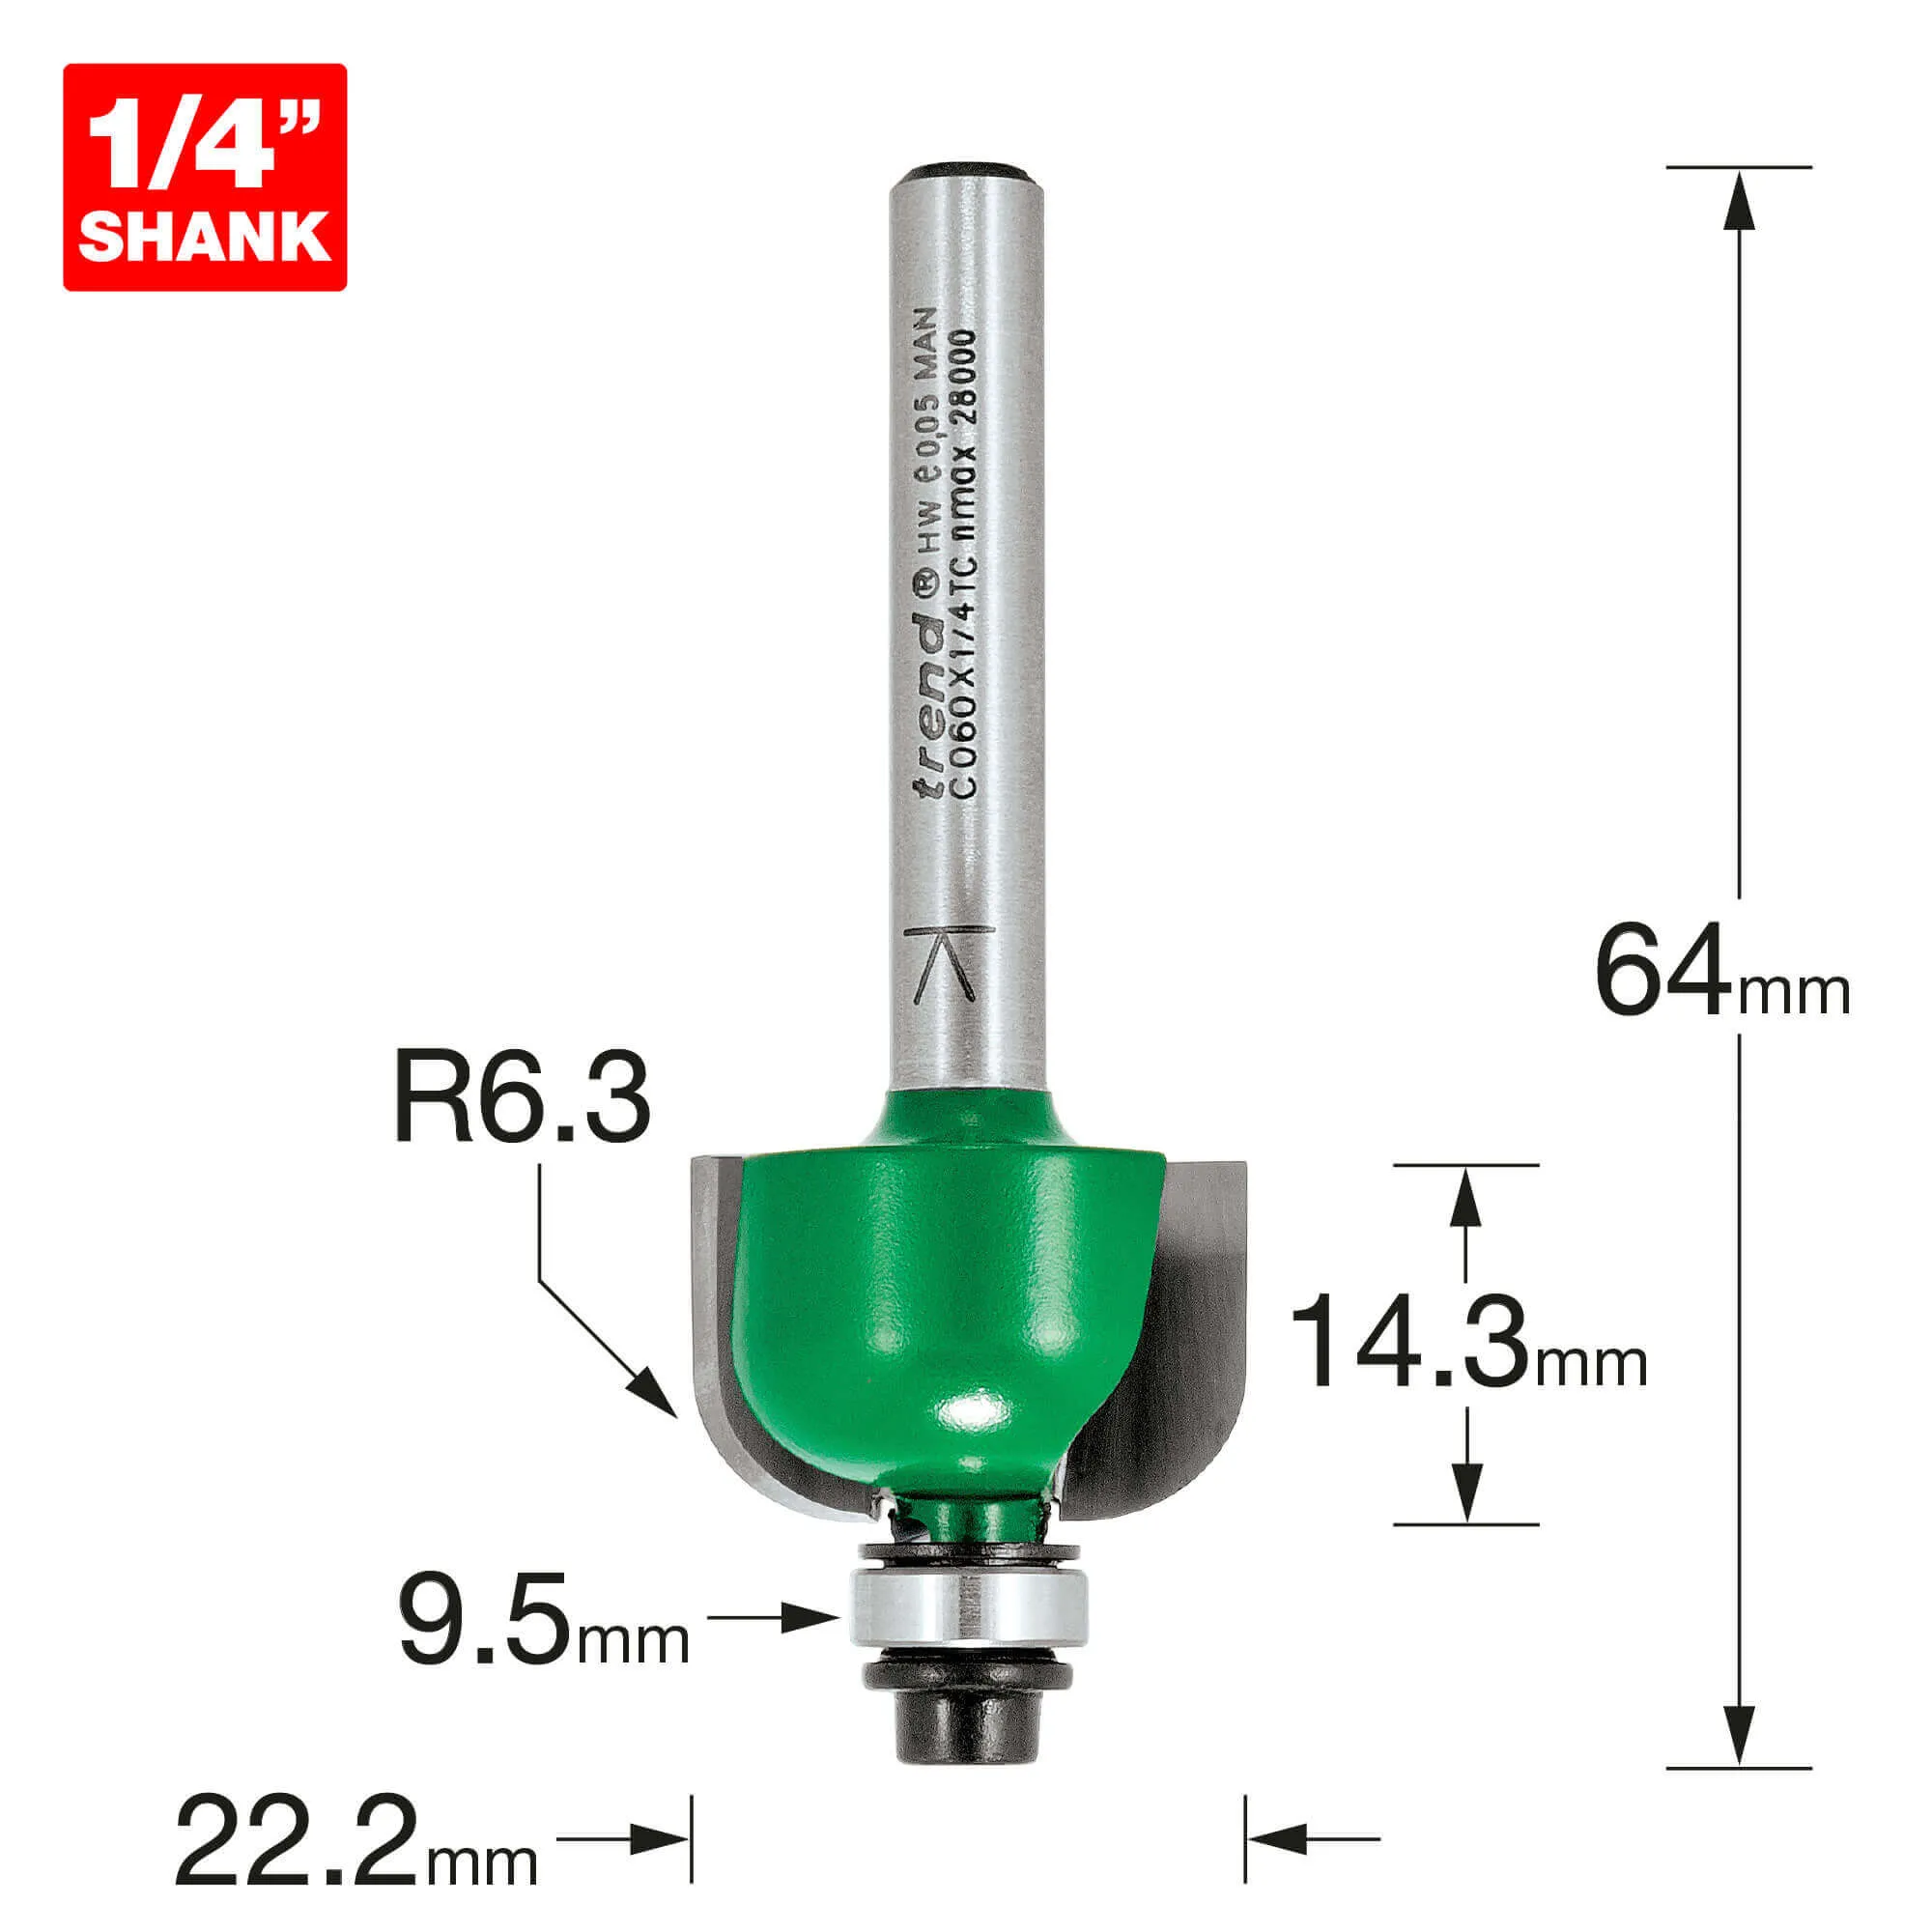 Trend CRAFTPRO Radius Bearing Guided Router Cutter - 22.2mm, 14.3mm, 1/4"